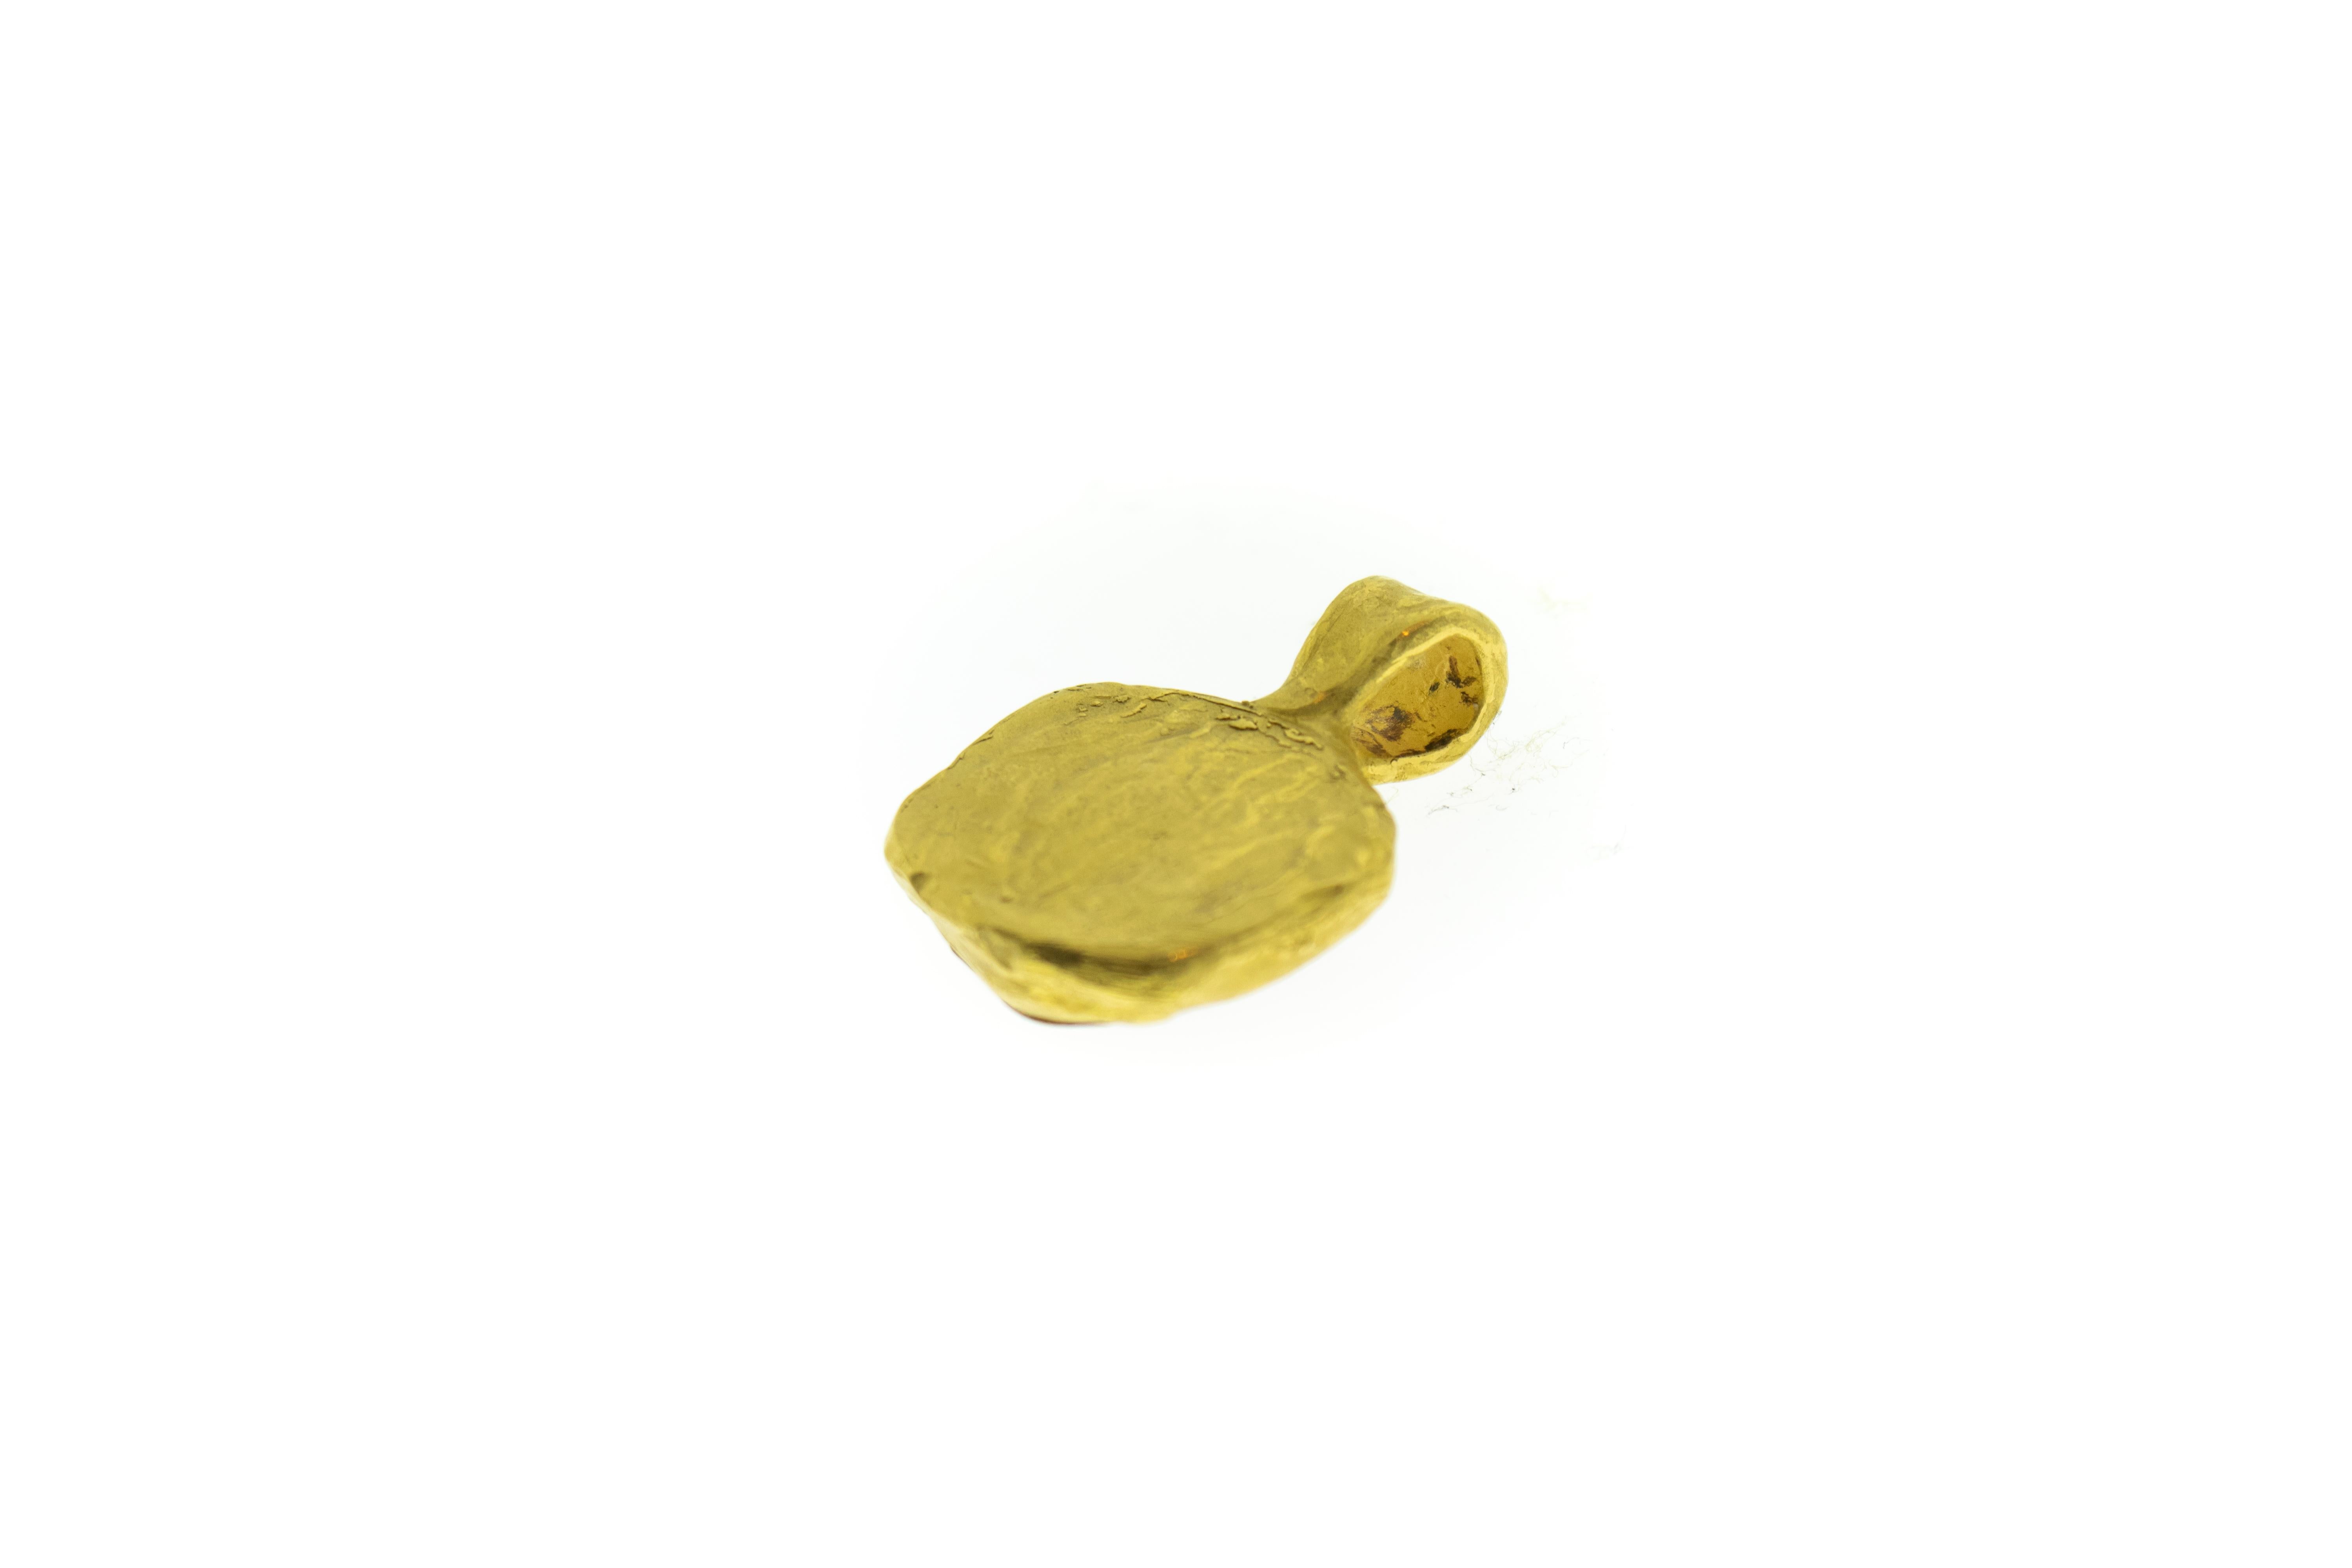 Revival Ancient Clay Artifact Mounted in 22 Karat Gold Pendant For Sale